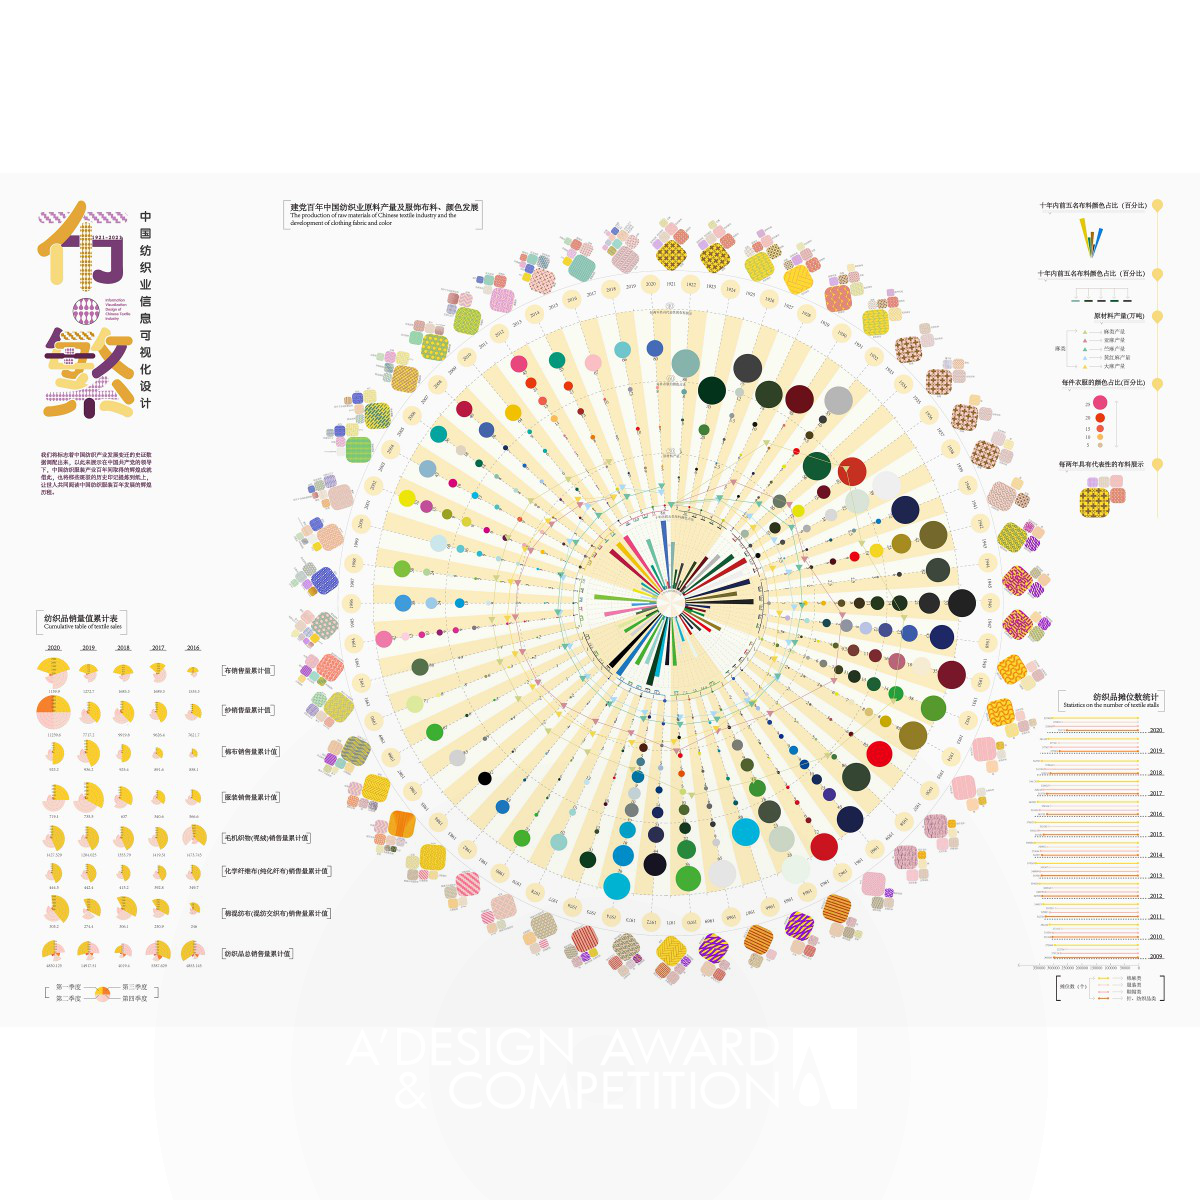 Colorful Cloths Information Visualization by Lu Zhao